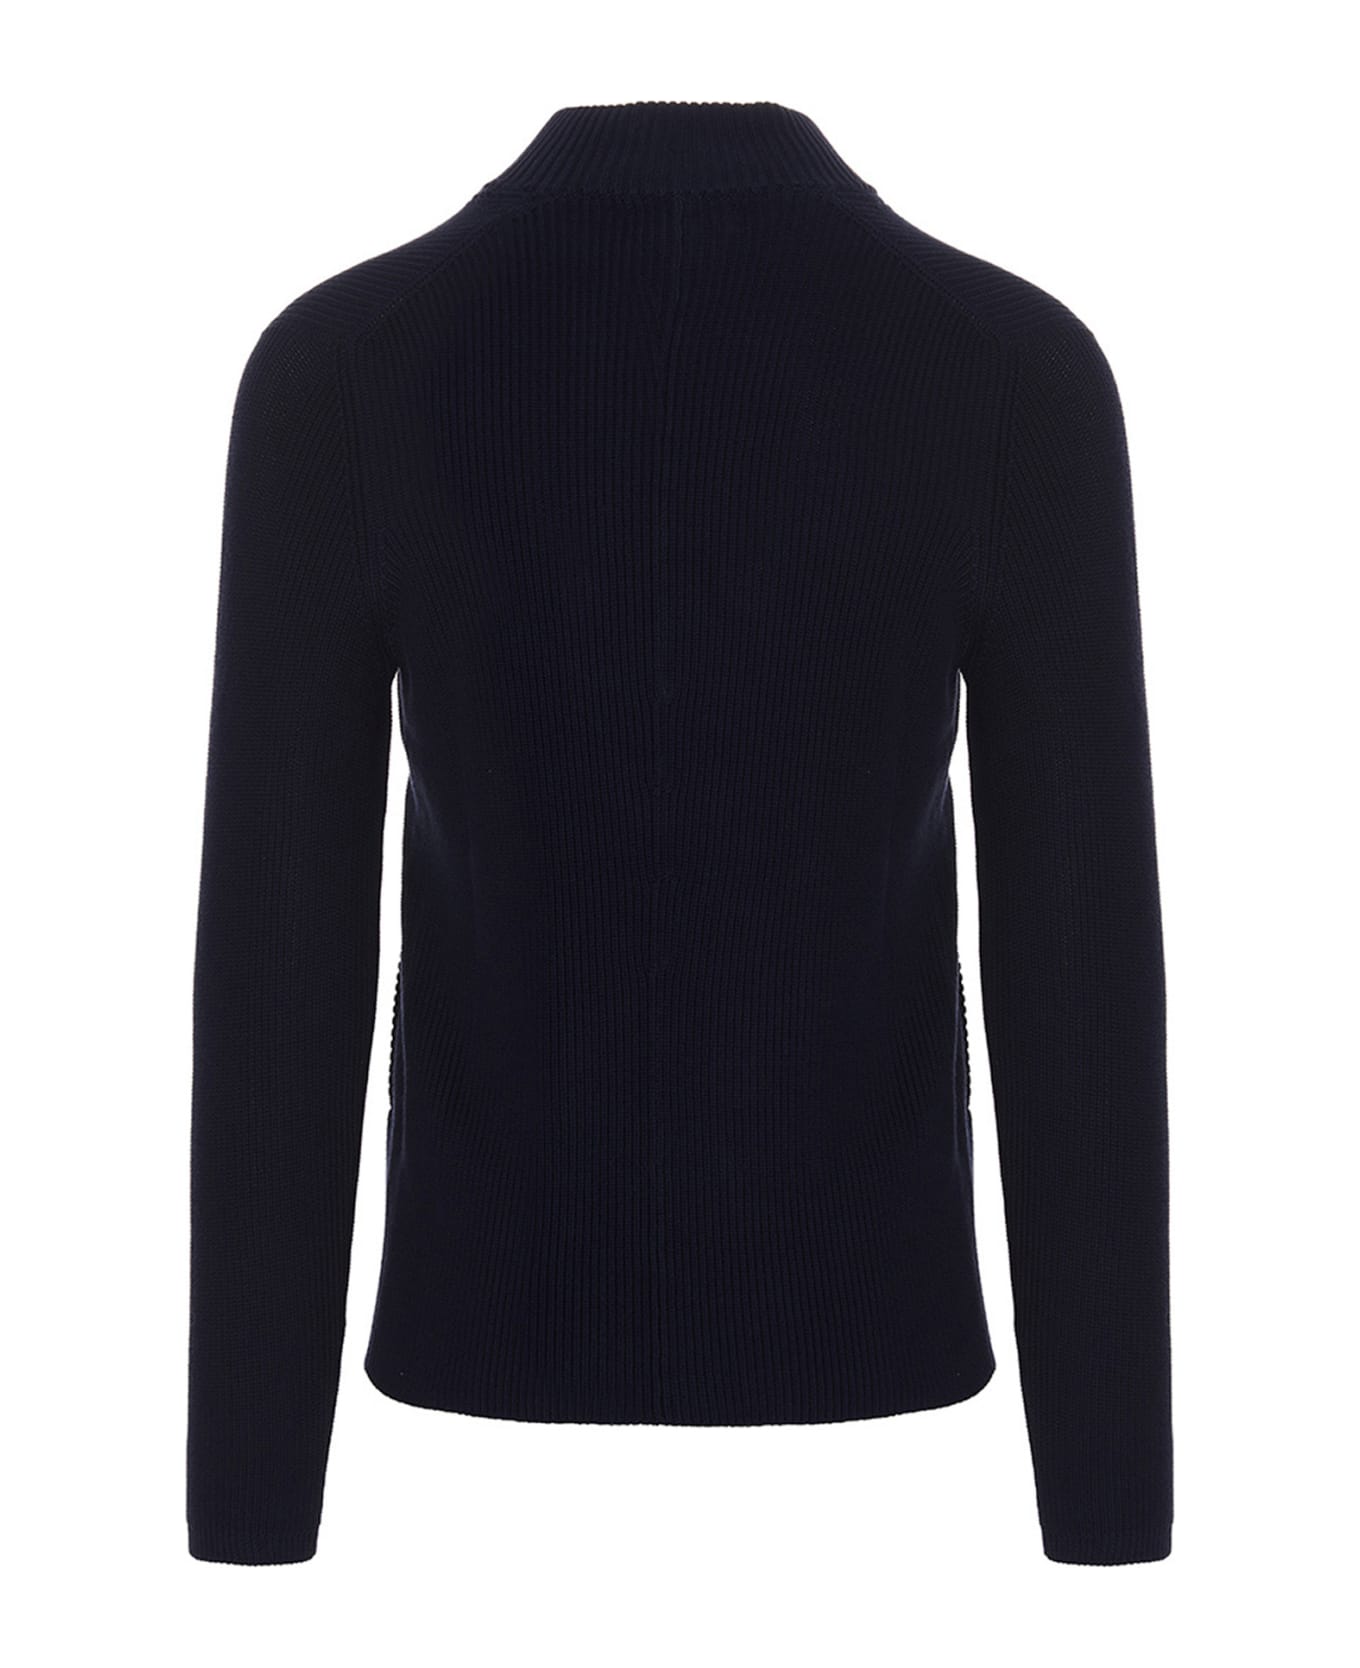 Brunello Cucinelli Double-breasted Cardigan - Navy